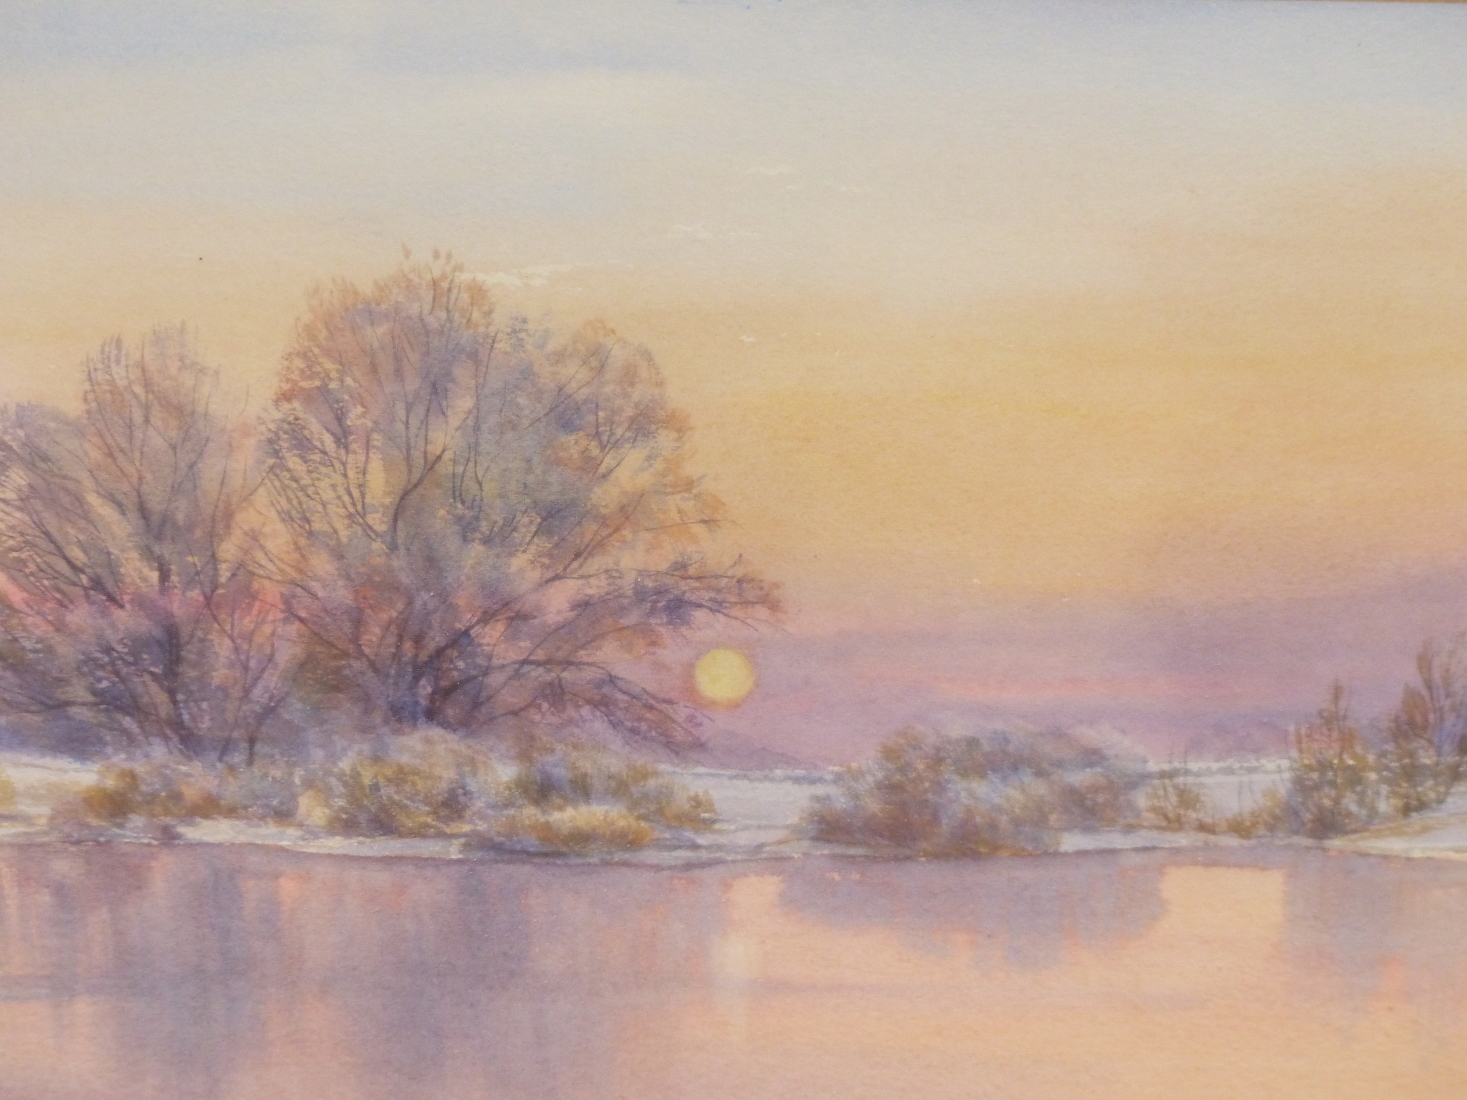 VALERIE PETTS (20TH CENTURY) ARR, WINTER EVENING AT HARDWICK, SIGNED, WATERCOLOUR, 33.5 X 21.5CM.